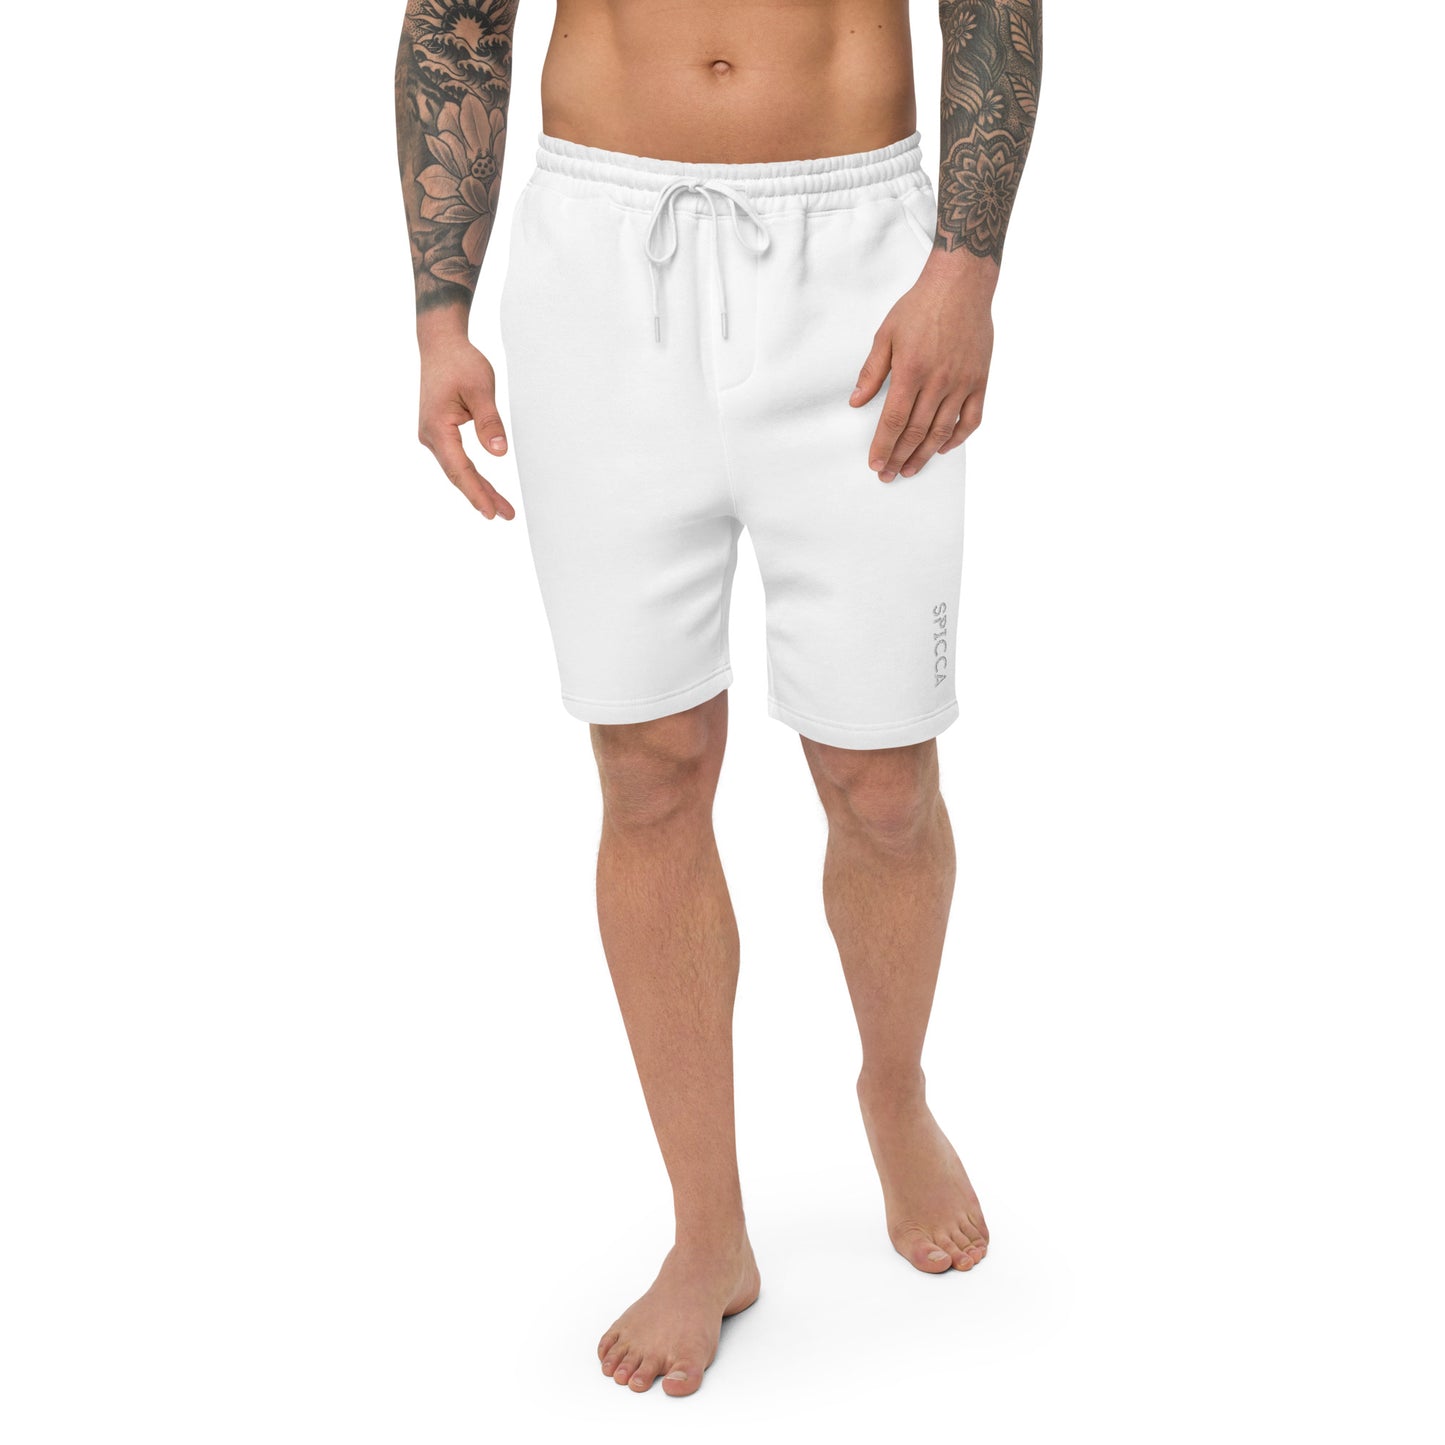 STANDOUT EMBROIDERED Men's fleece shorts designed by SPICCA